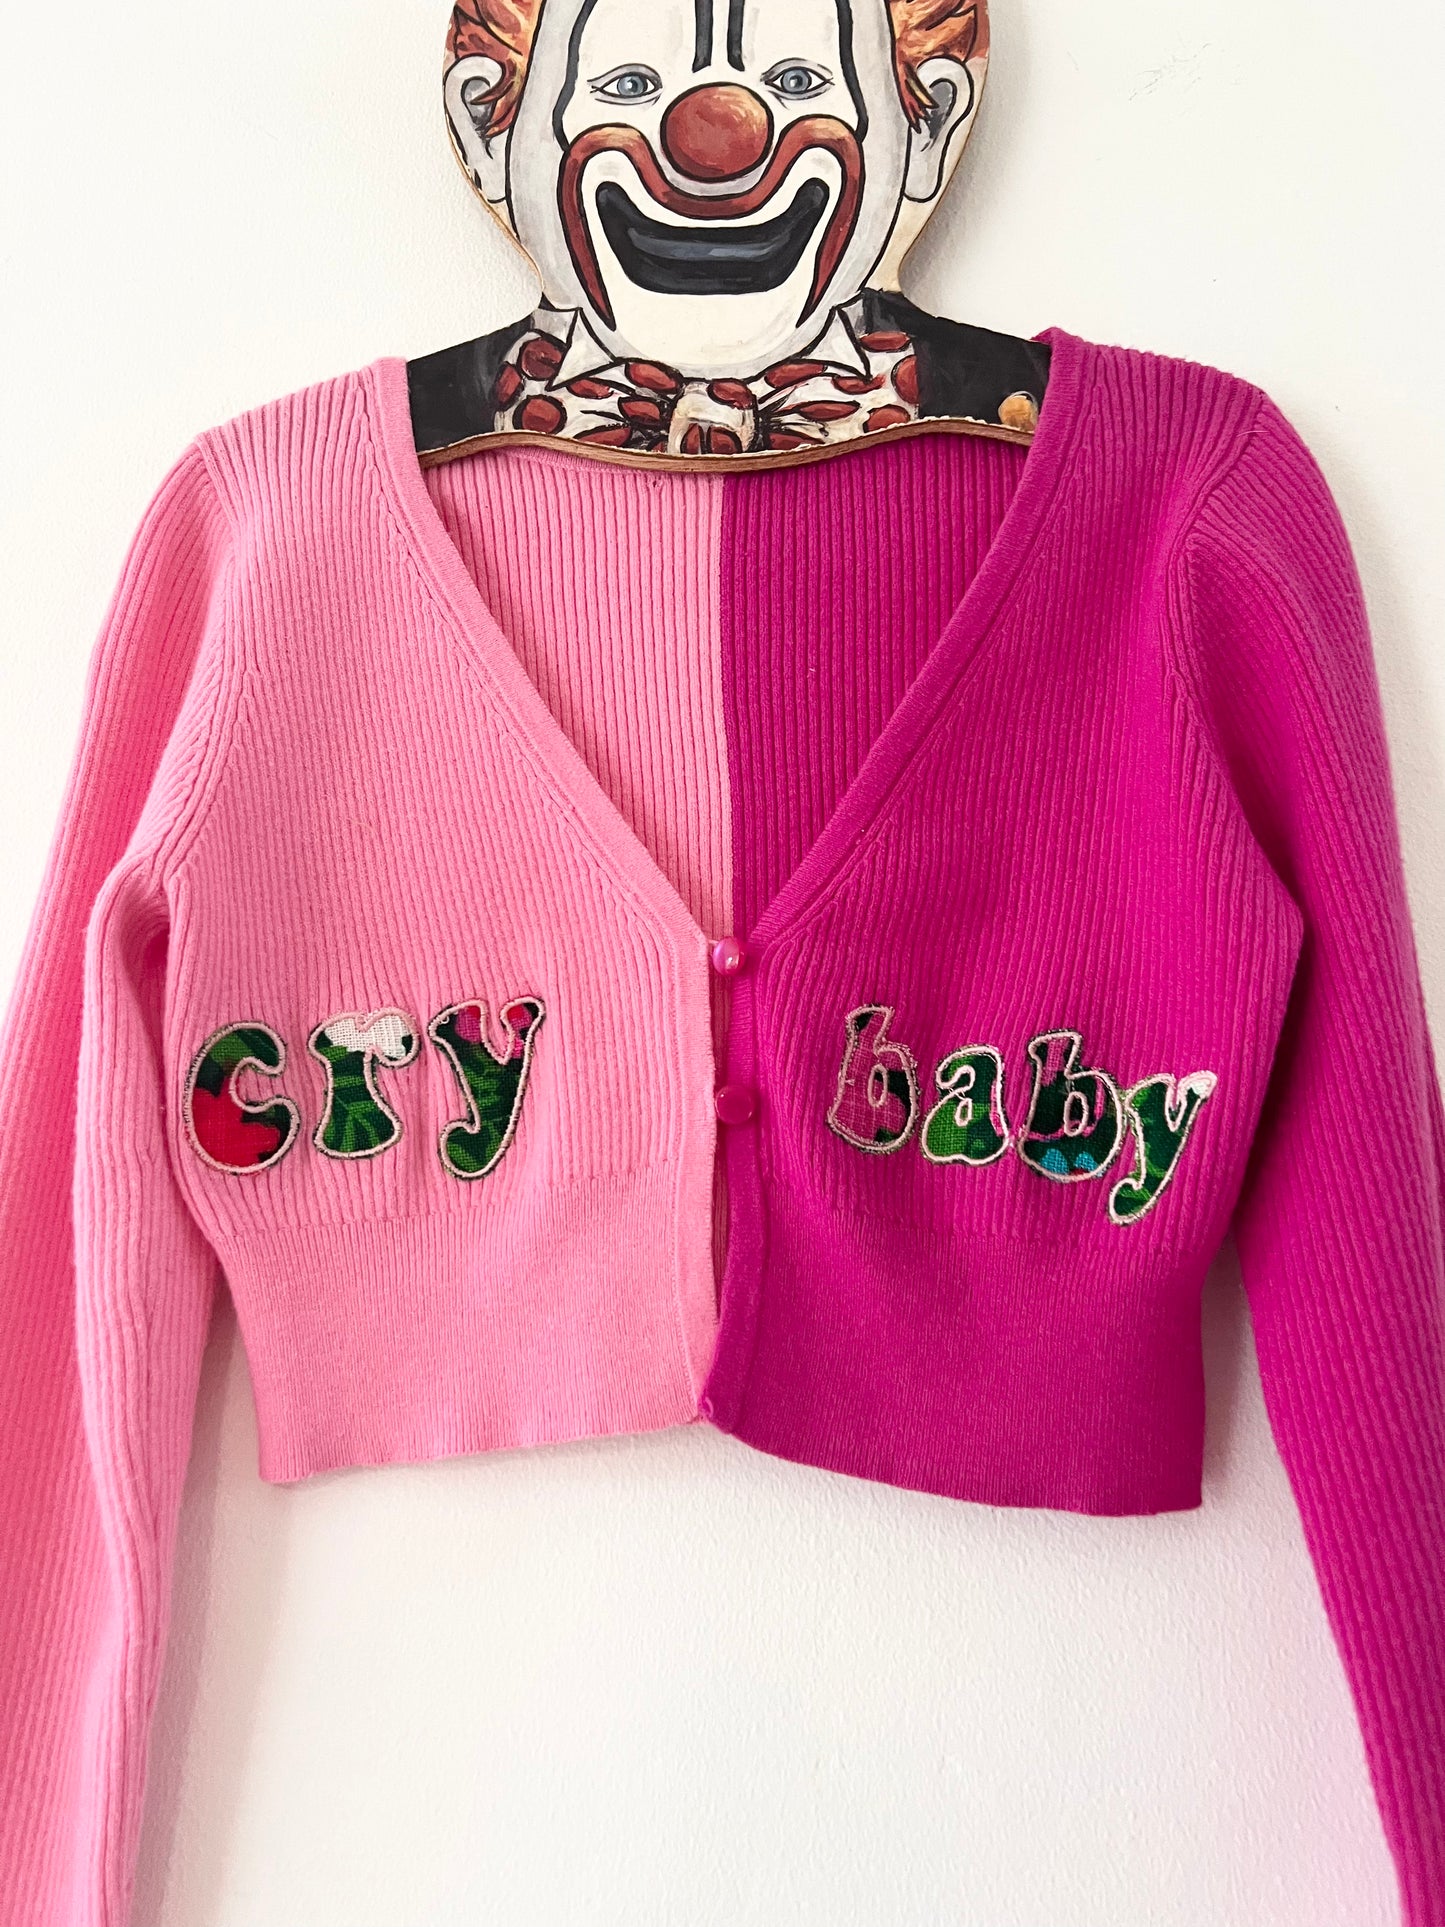 Cry Baby Appliqué Cropped Cardigan XS/S